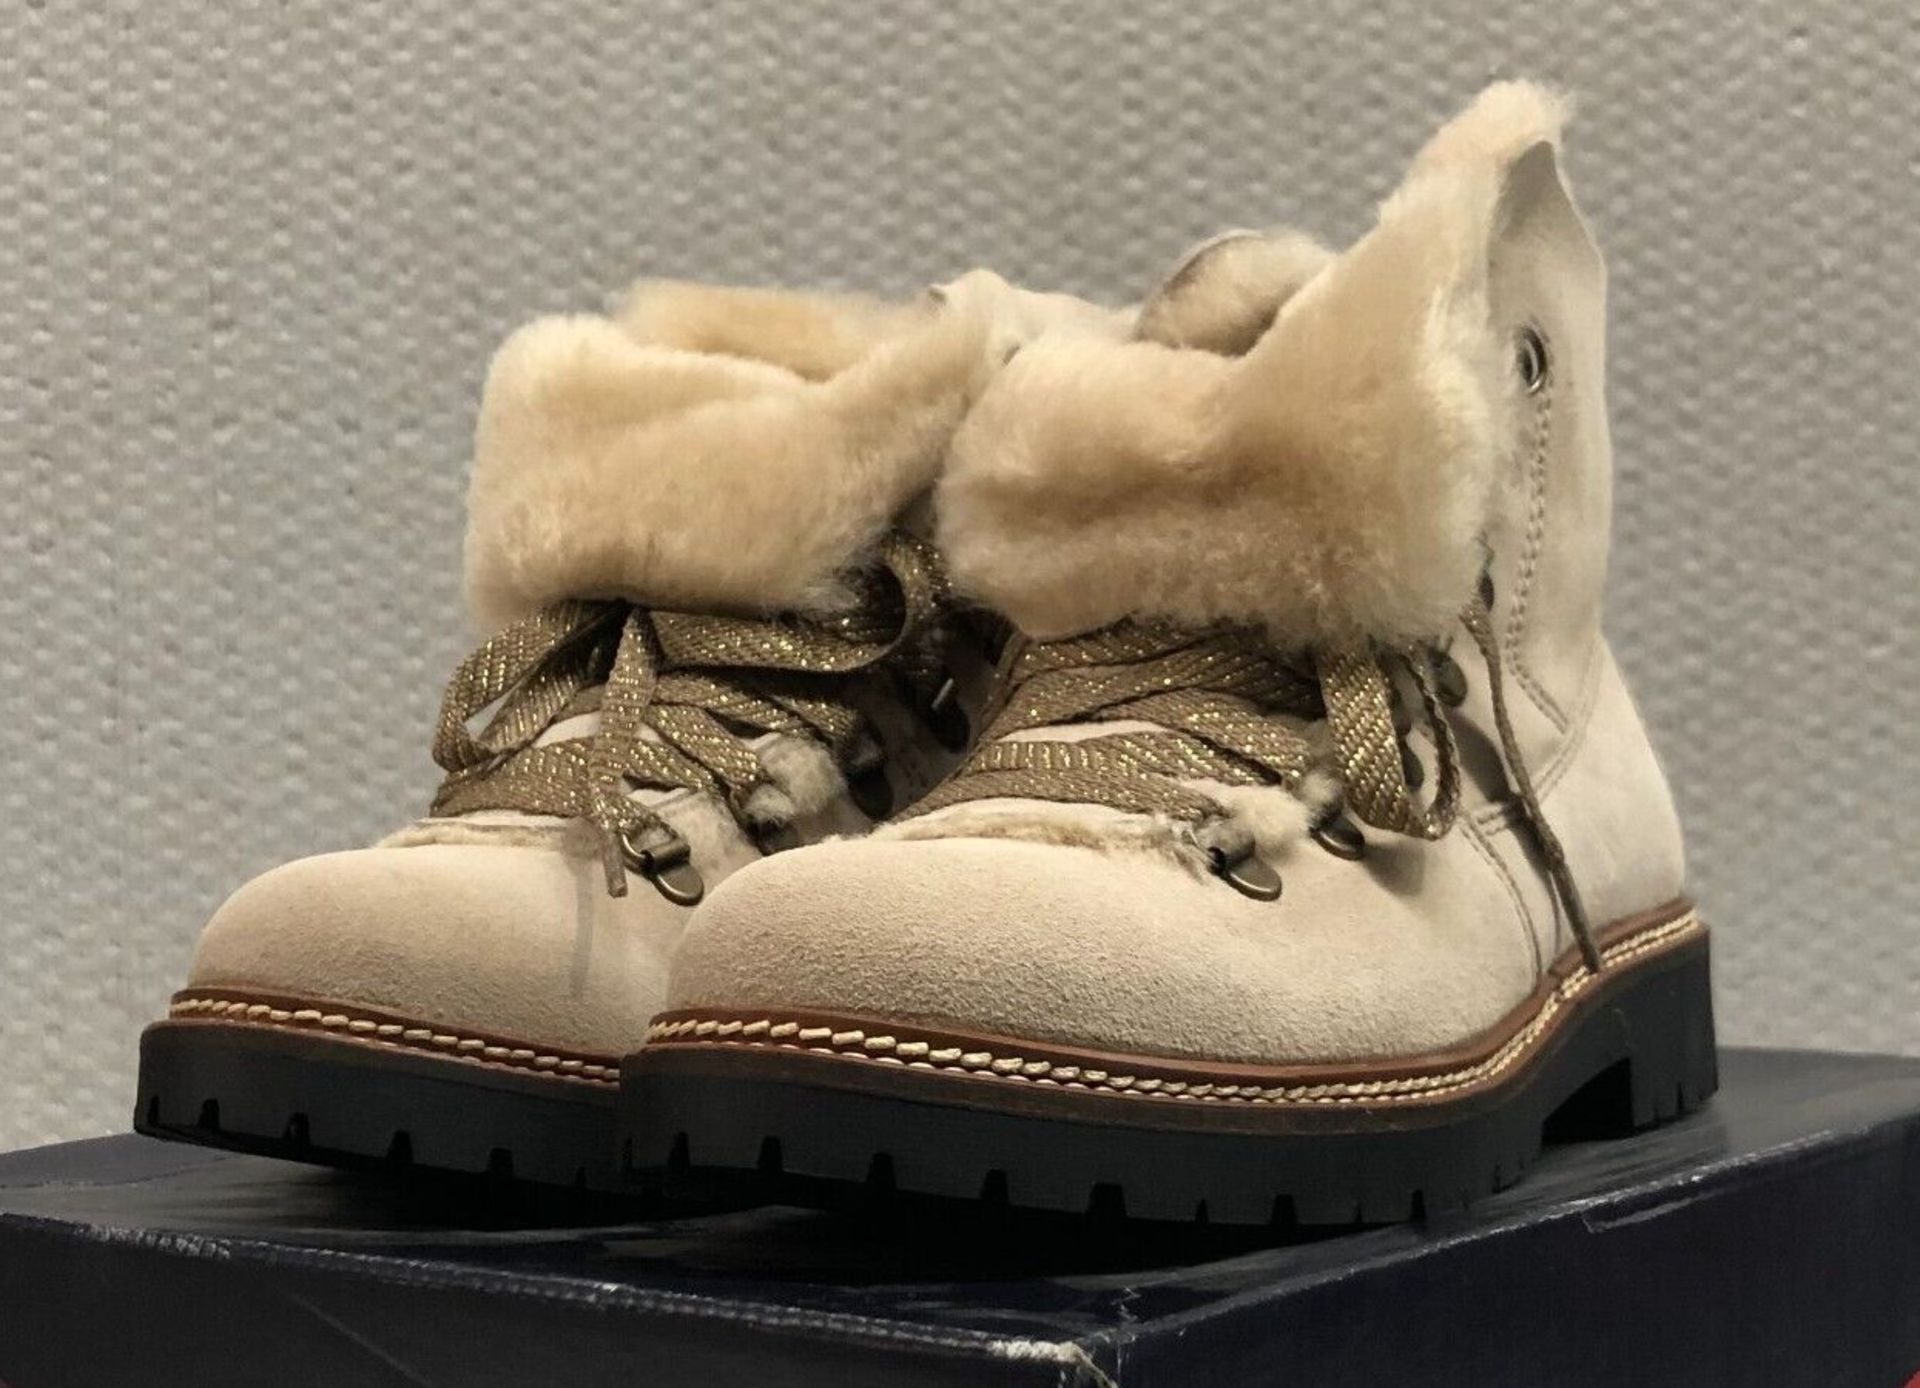 1 x Pair of Designer Olang Women's Winter Boots - Aurora.Lux 88 Beige - Euro Size 39 - New Boxed - Image 4 of 6